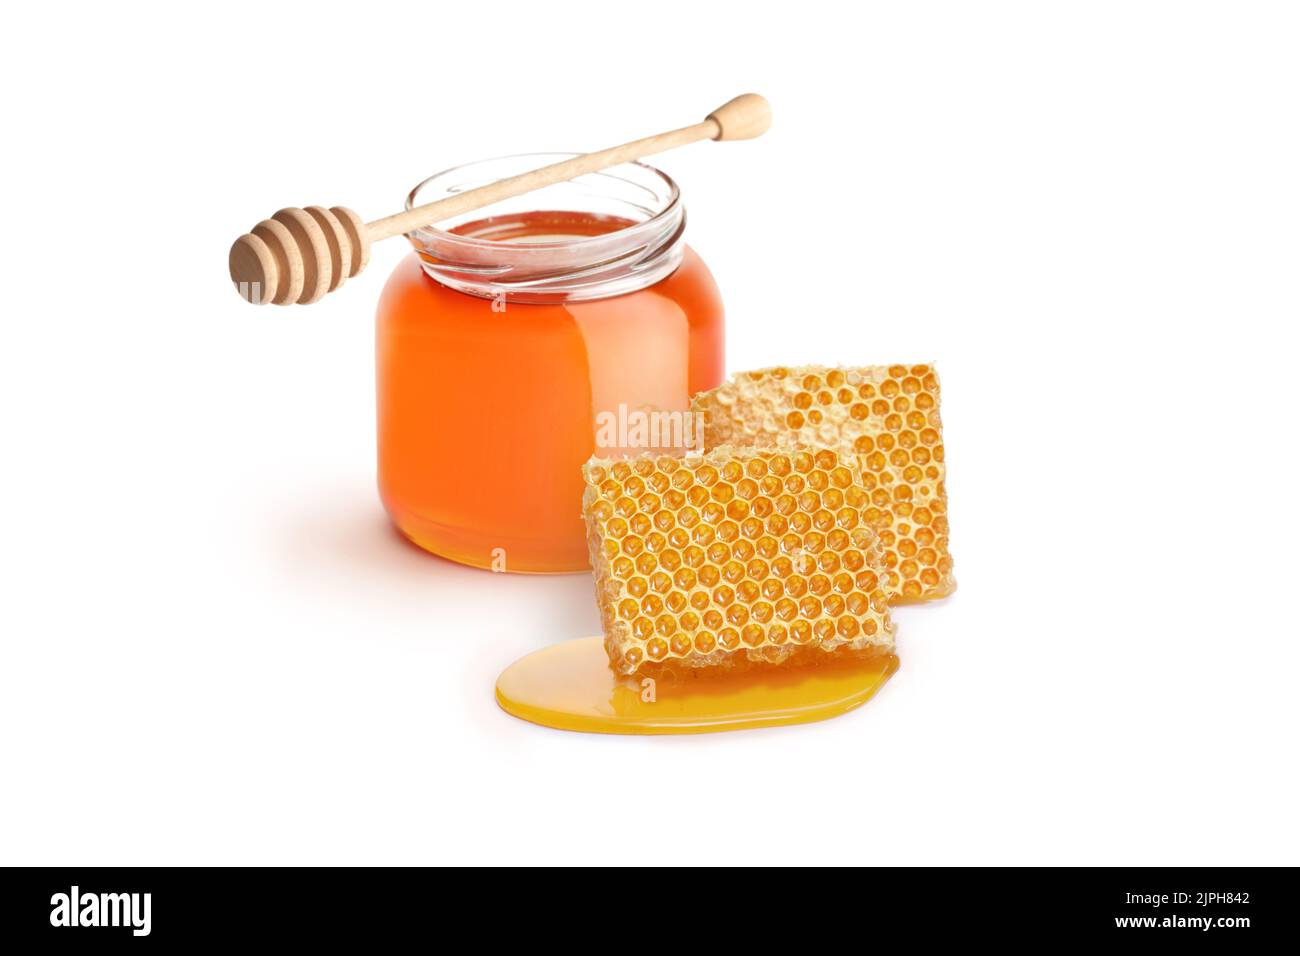 Small jar of honey with a dipper and pieces of honeycomb isolated on white background Stock Photo